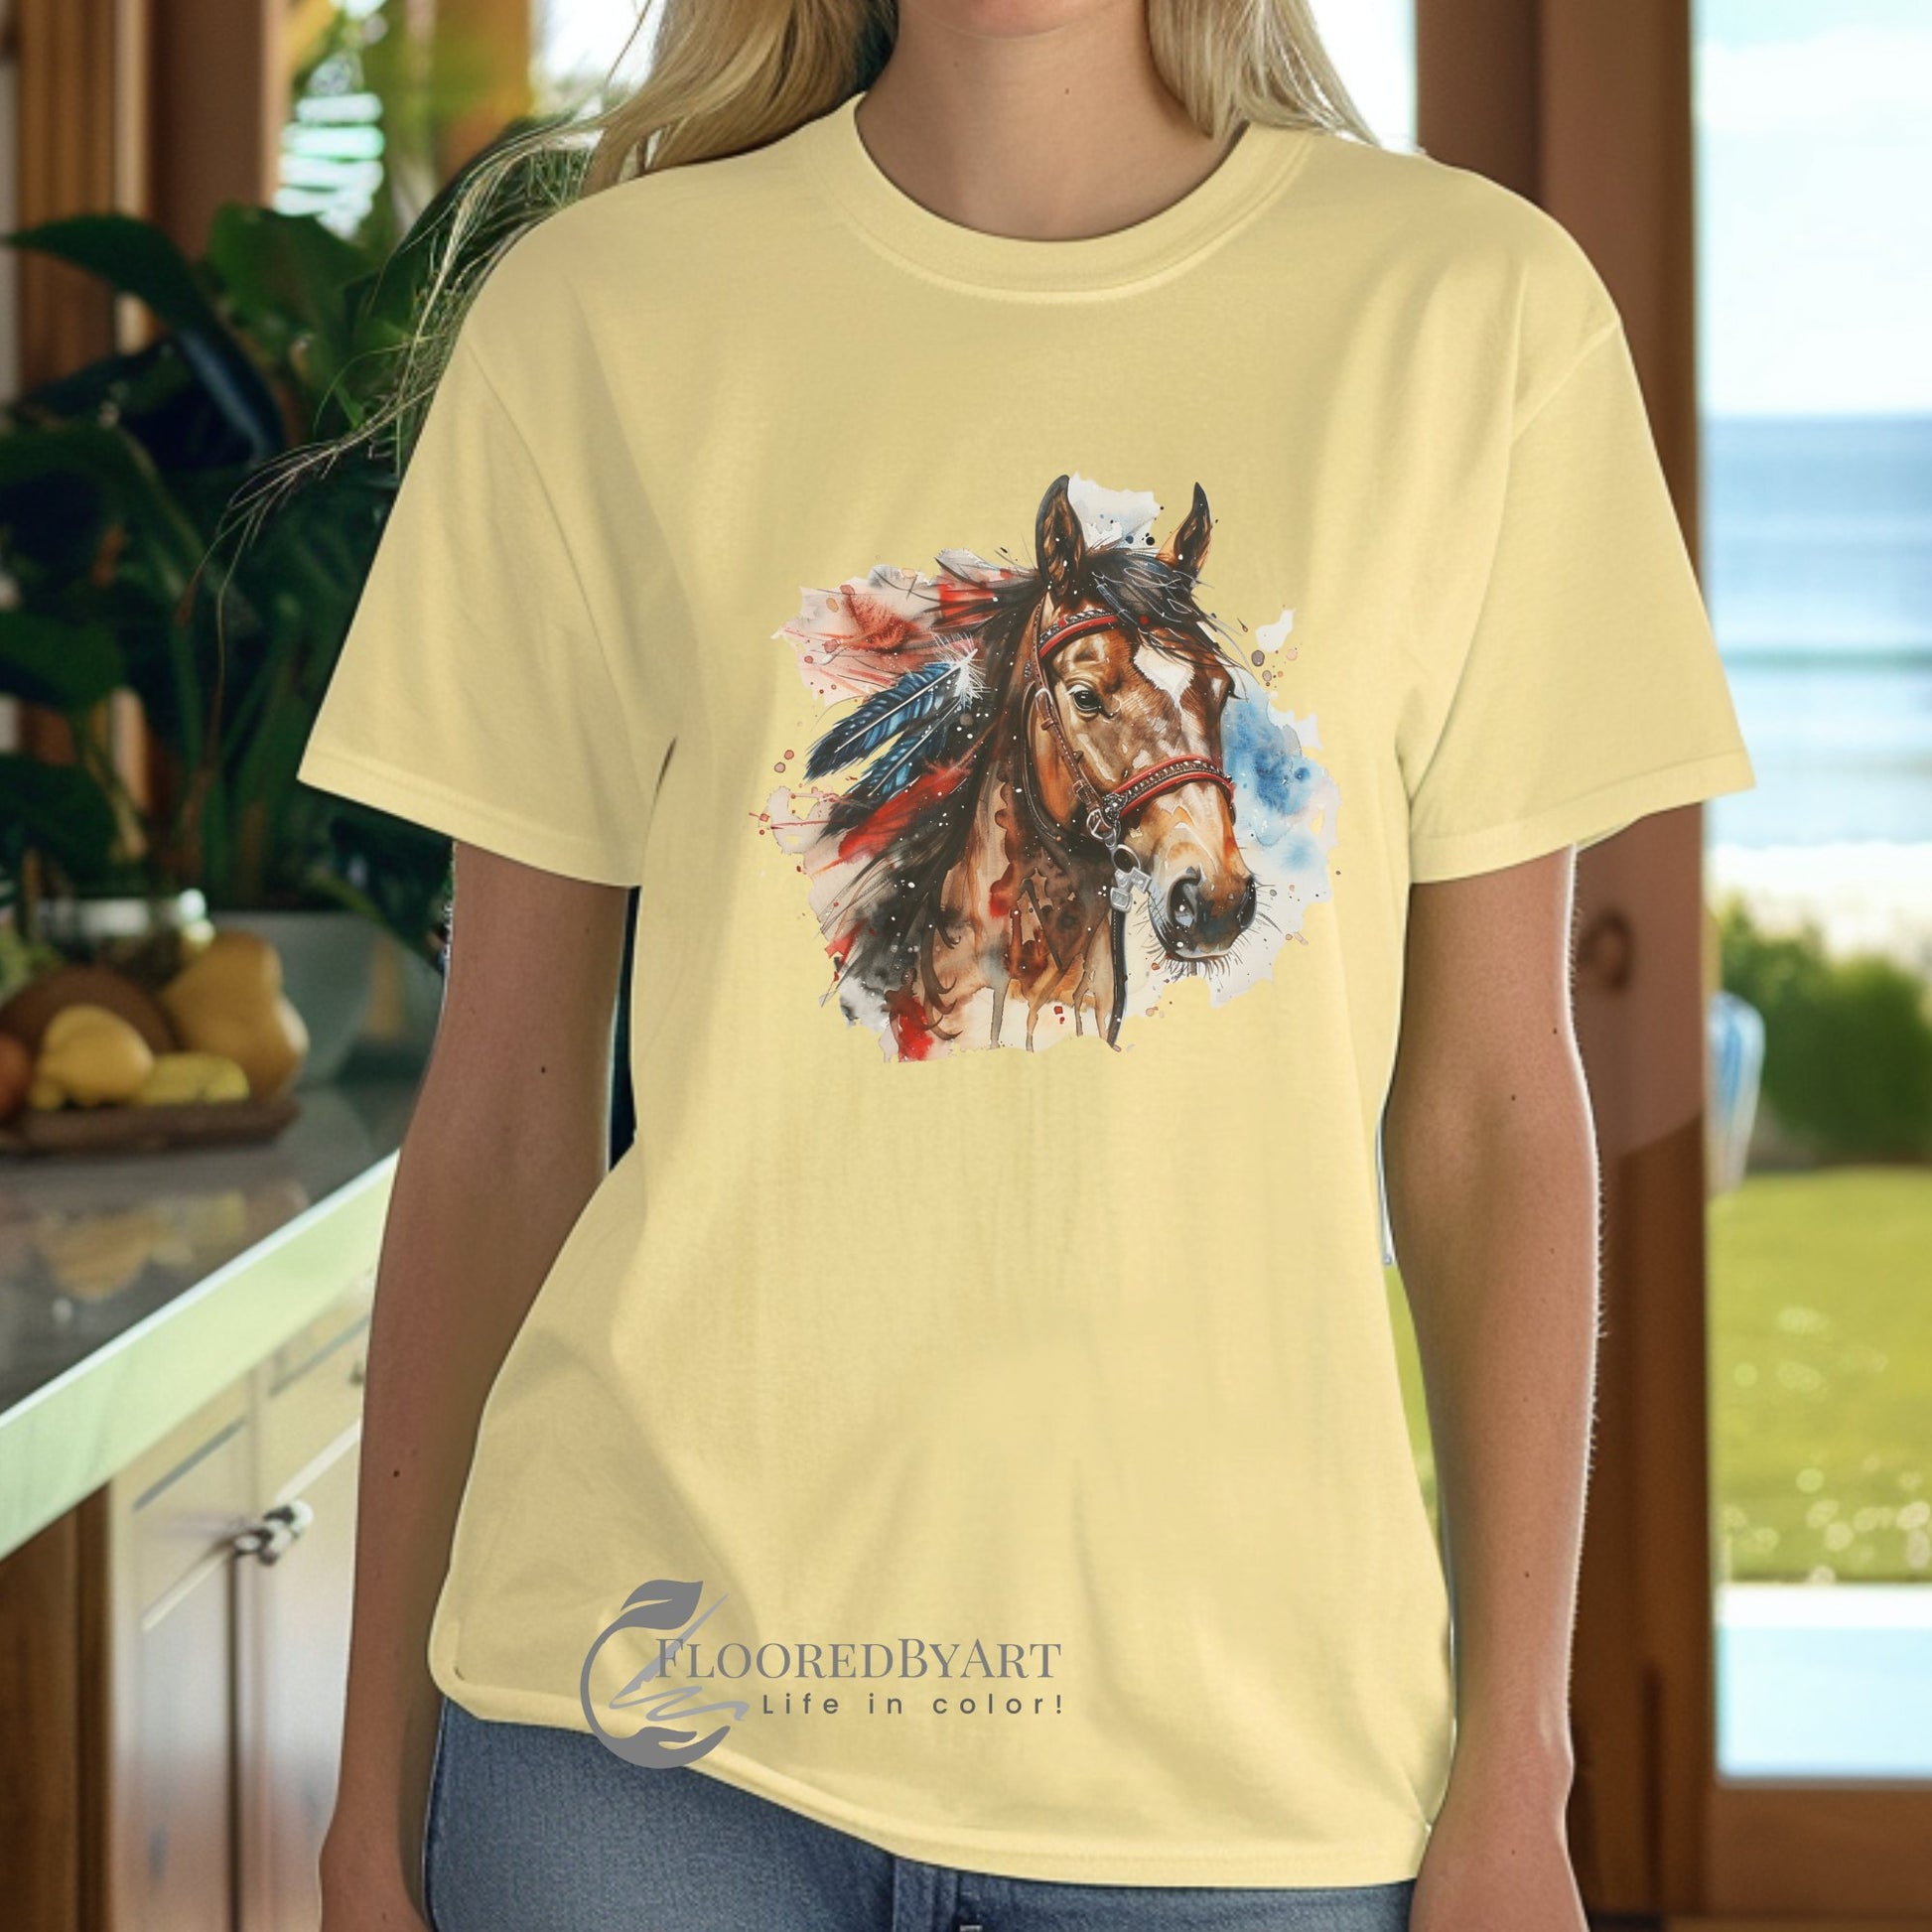 Patriotic Horse T-shirt, Comfort Color Tee, Cowgirl Spirit Horse With Feathers - FlooredByArt